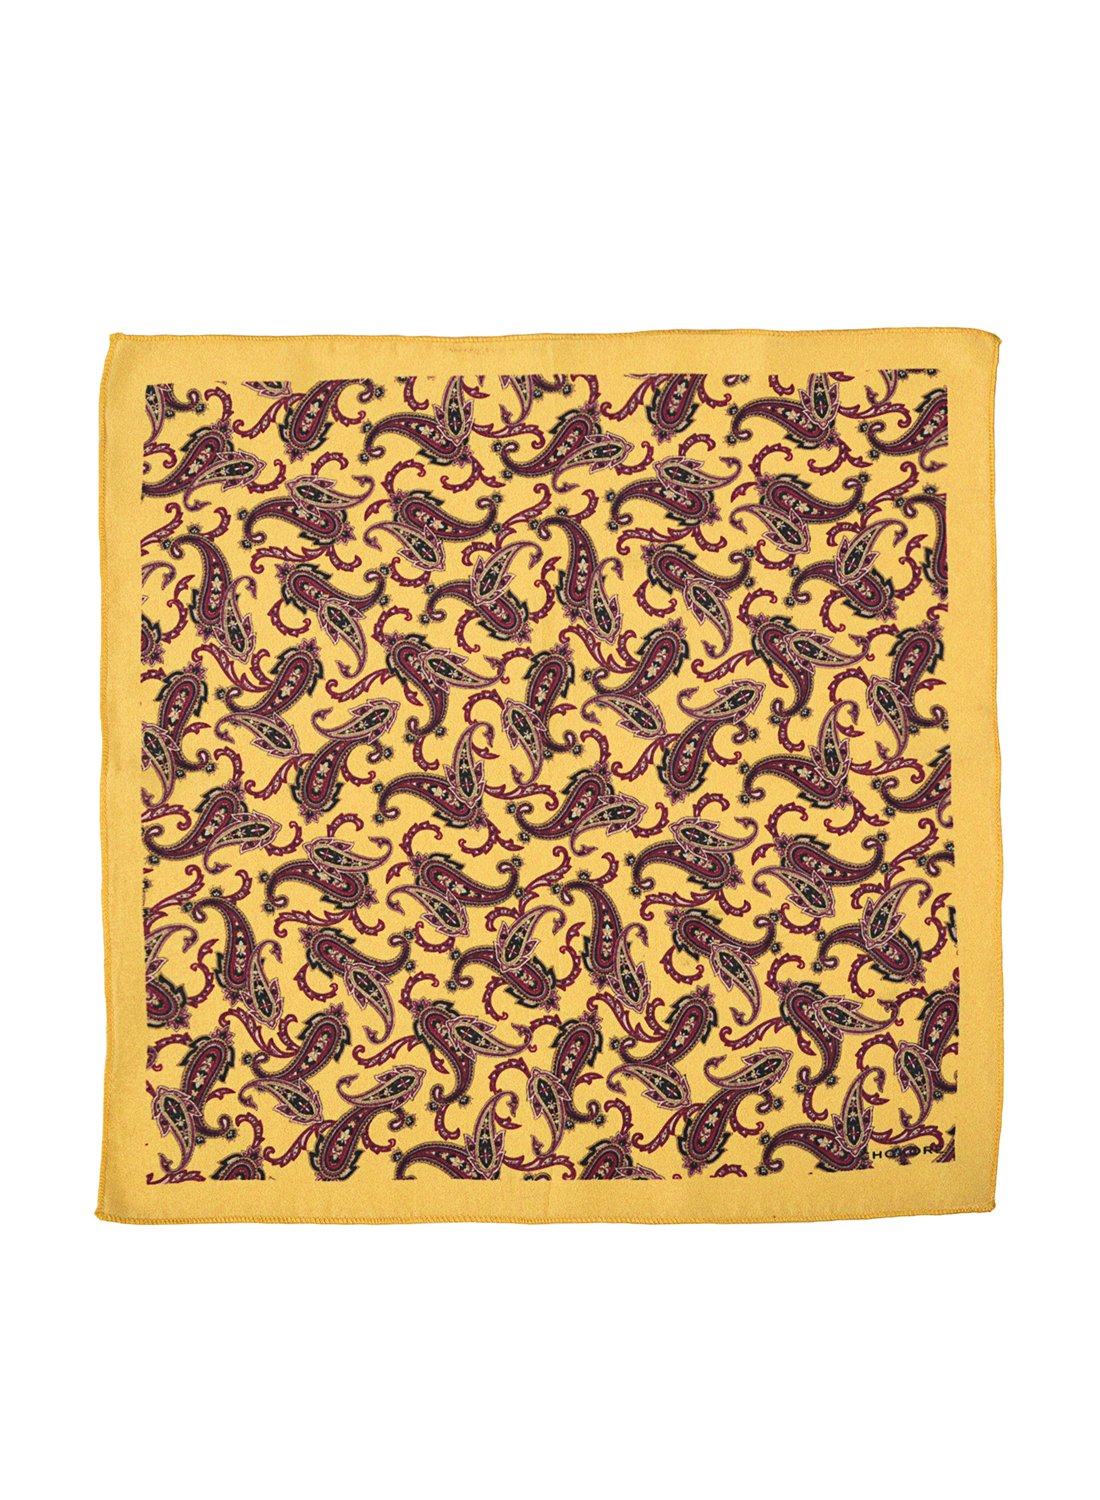 Chokore Tangerine & Burgundy Pocket Square from Indian at Heart collection